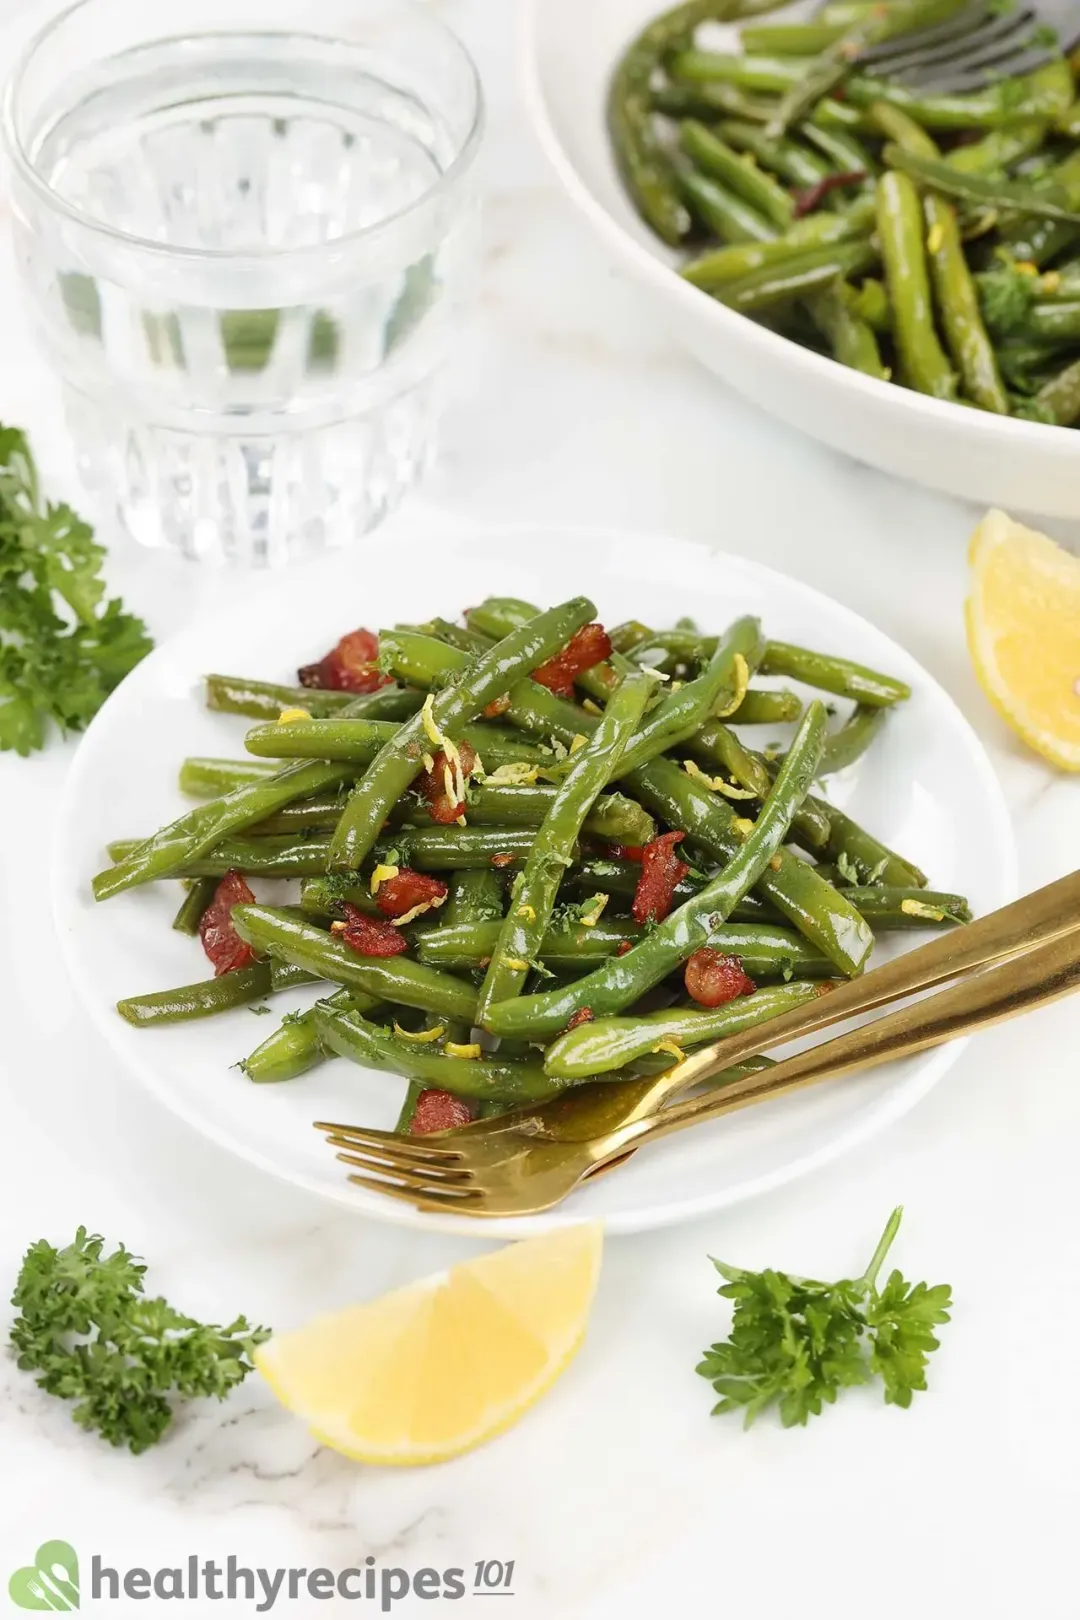 Are Green Beans Good for You